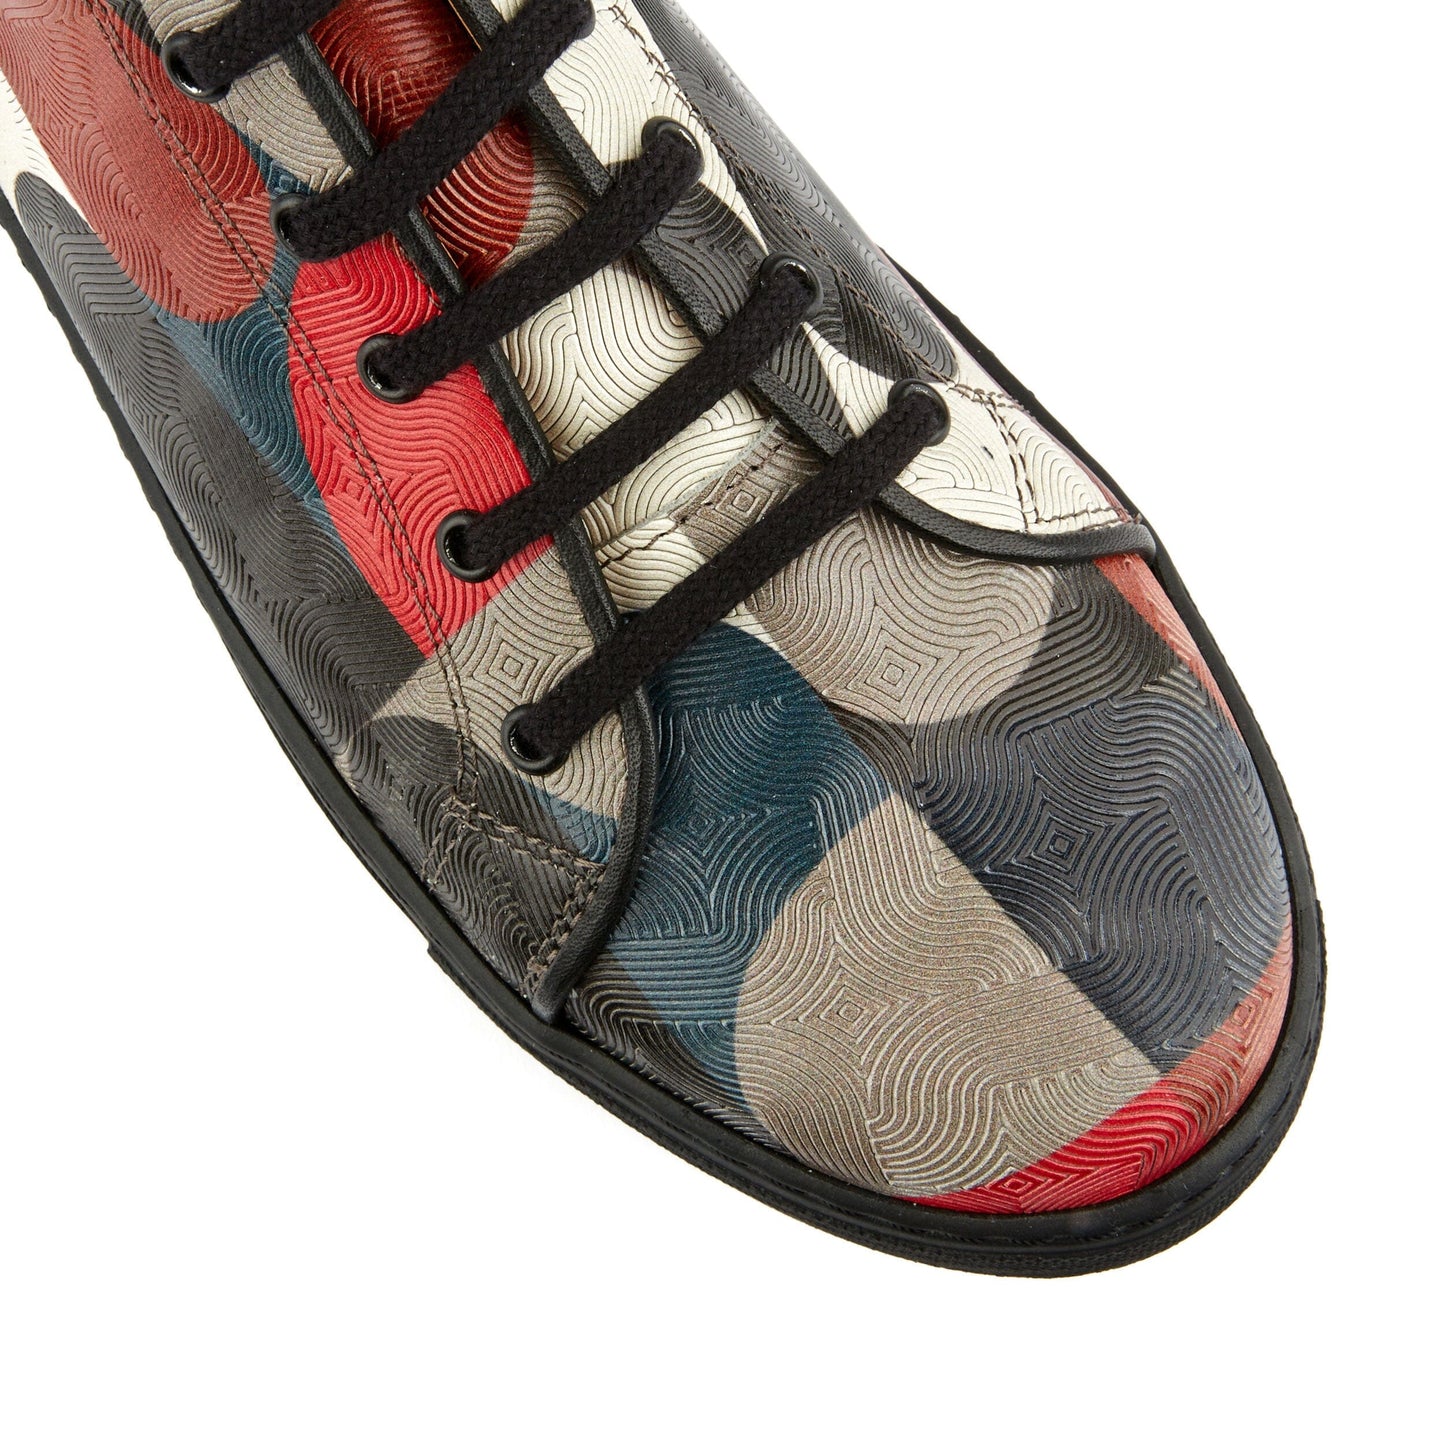 Camila - Black & Red Groovy Womens Trainers Embassy London 